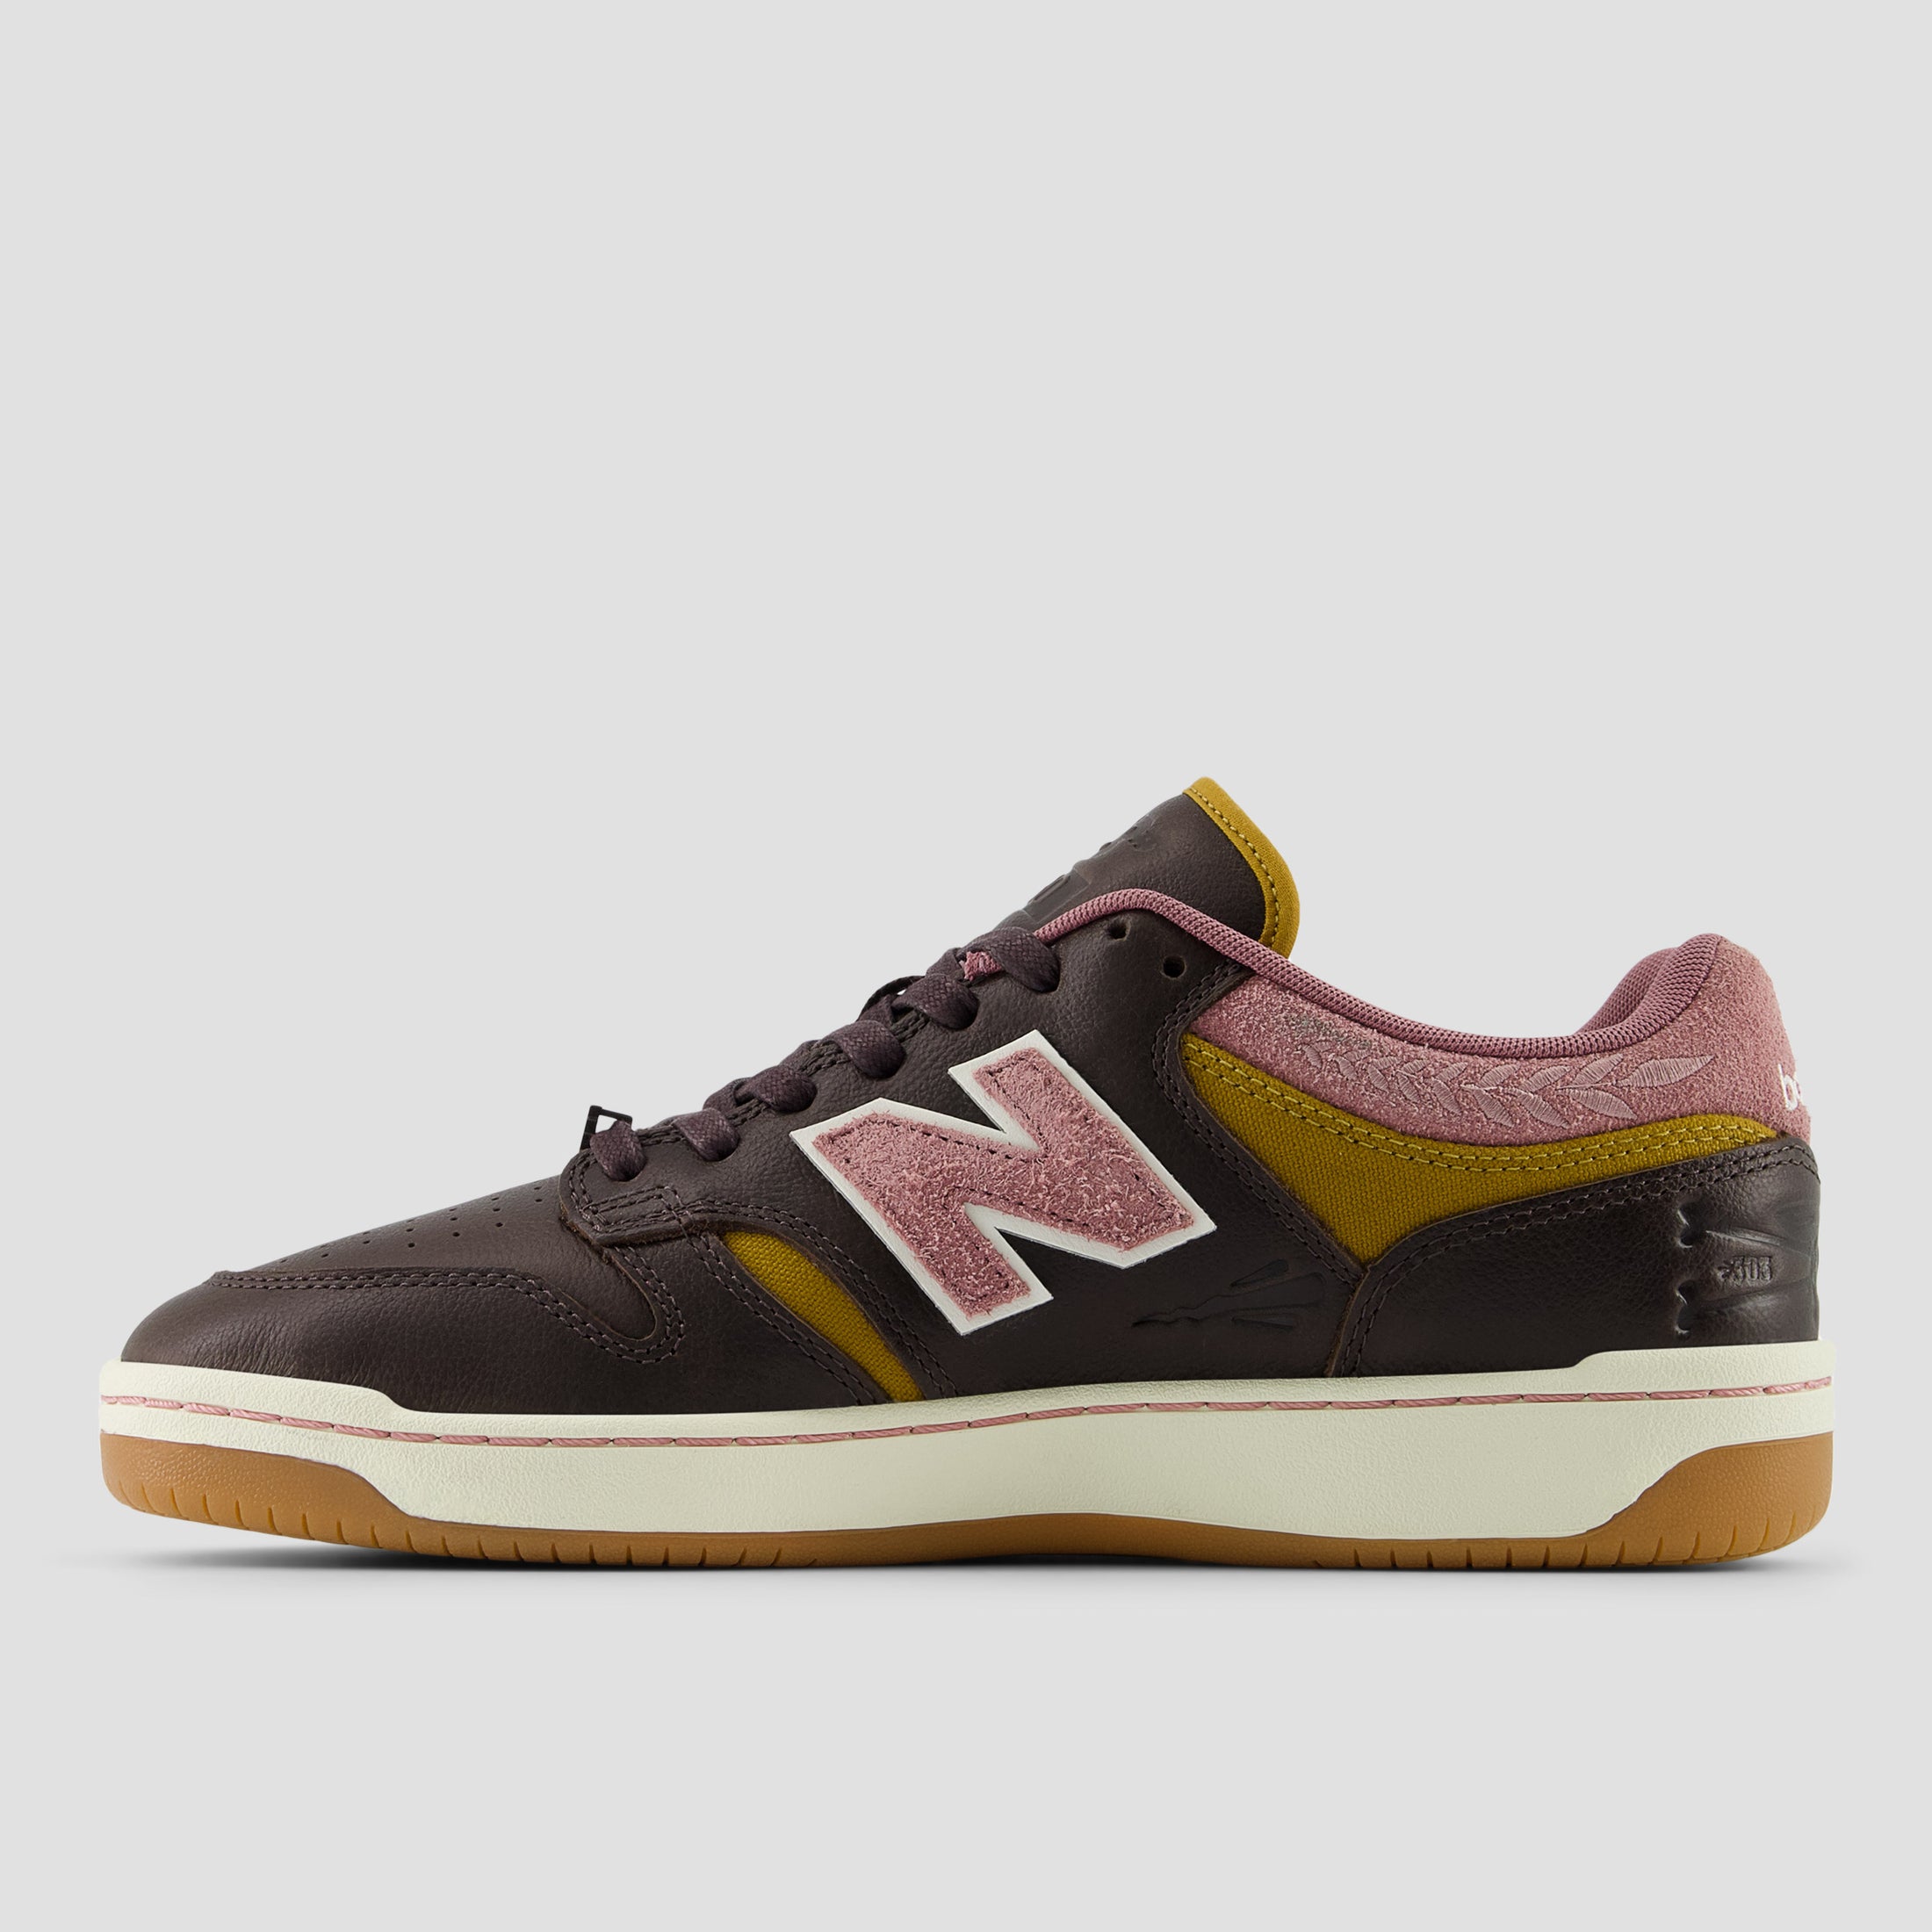 New Balance X Jeremy Fish X 303 Boards 480 Skate Shoes Brown / Pink